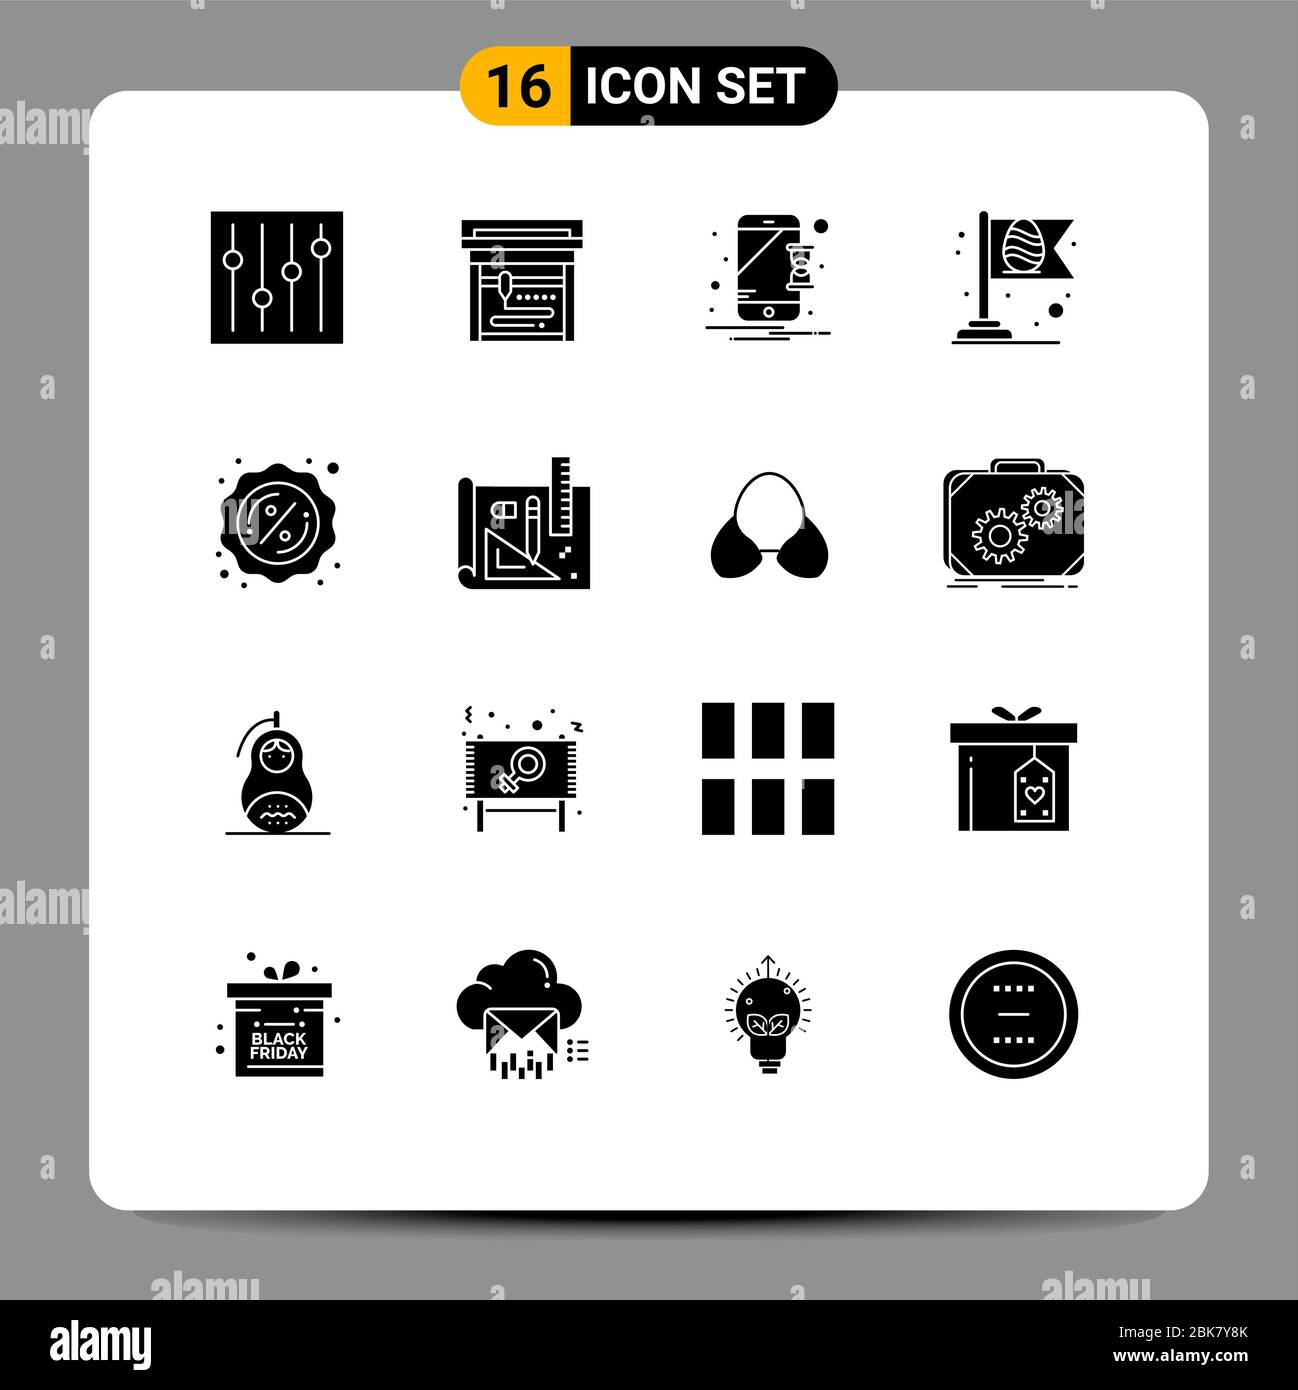 Set of 16 Modern UI Icons Symbols Signs for drawing, tag, notification, sales, flag Editable Vector Design Elements Stock Vector